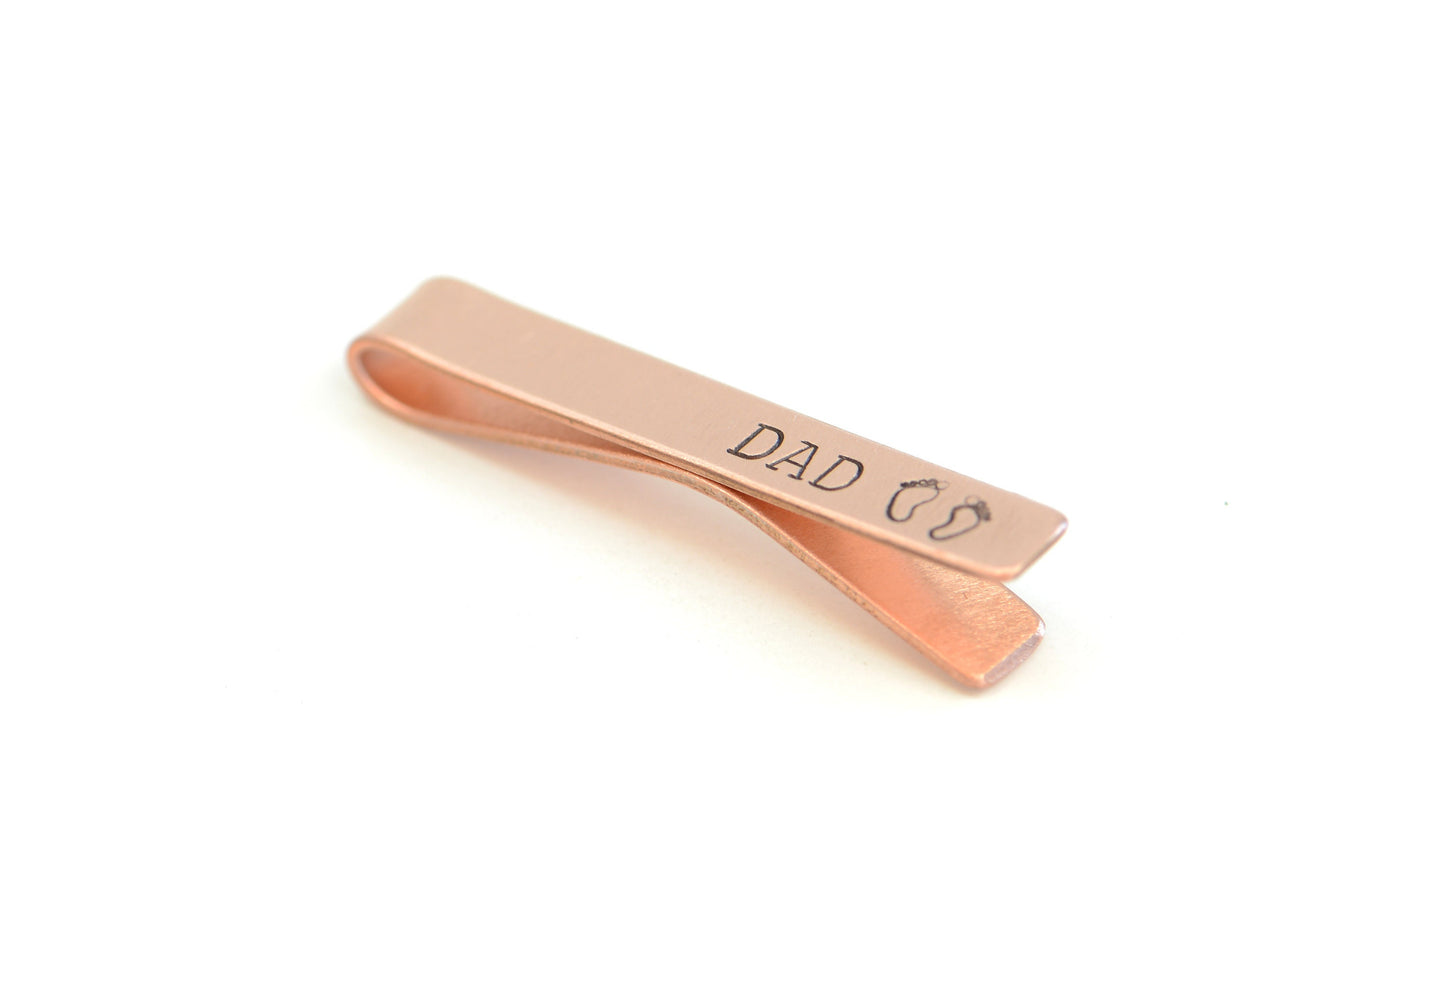 Copper tie clip for new dad stamped with DAD and baby feet